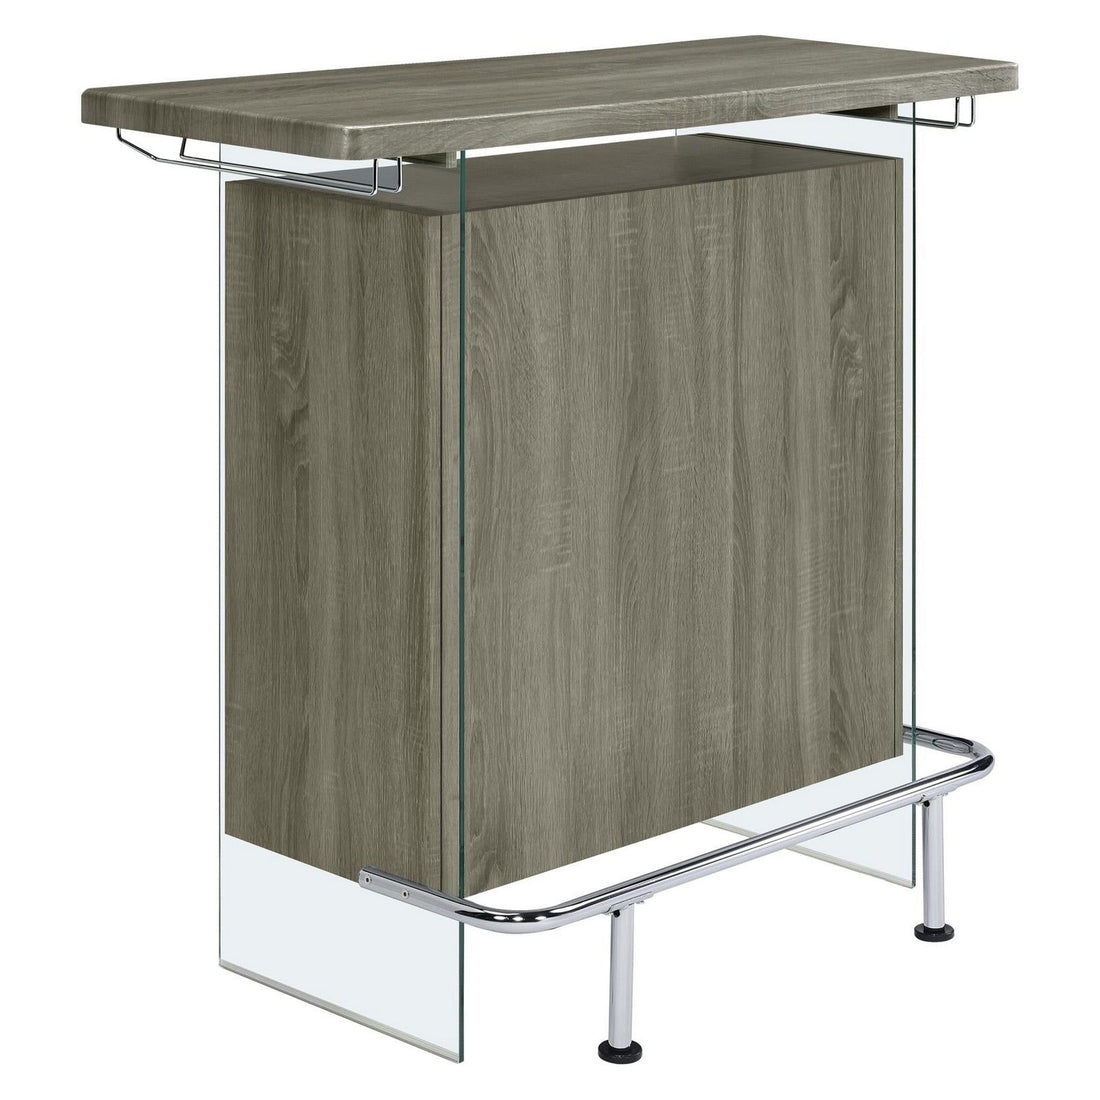 Acosta Rectangular Bar Unit with Footrest and Glass Side Panels 182631